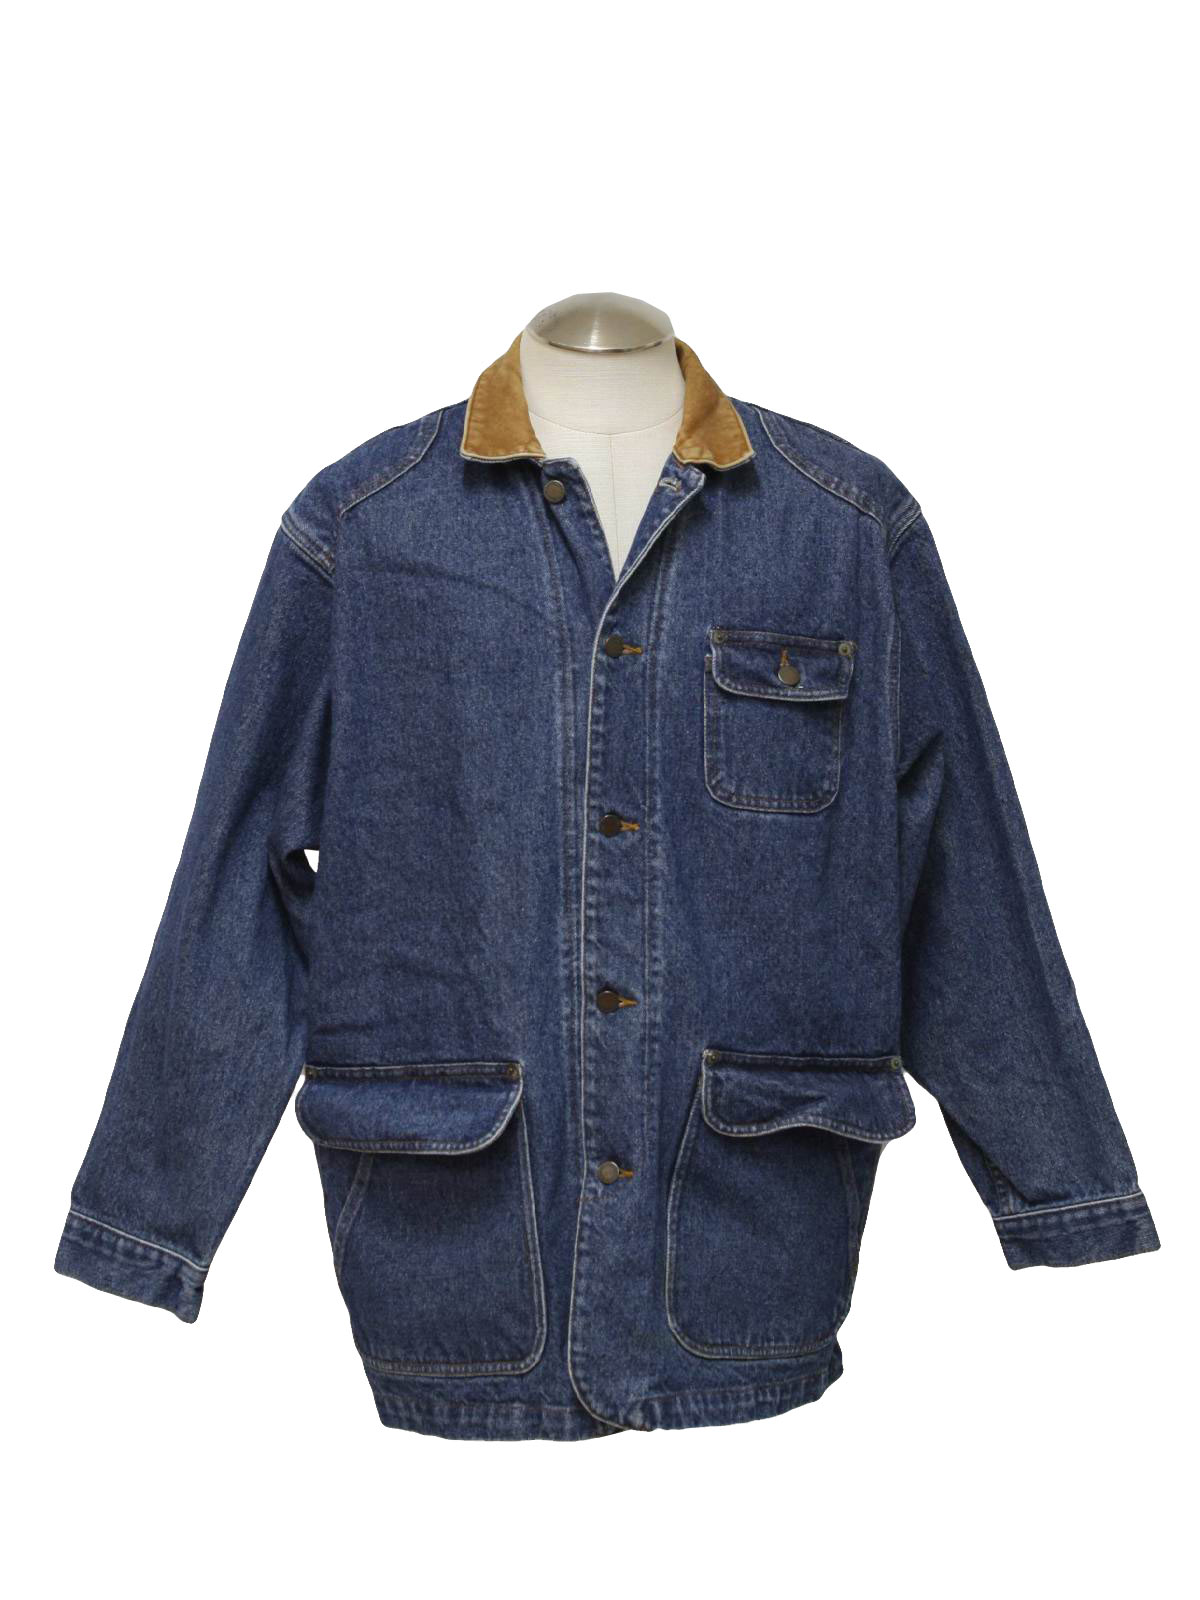 The Australian Outback Collection Eighties Vintage Jacket: Late 80s ...